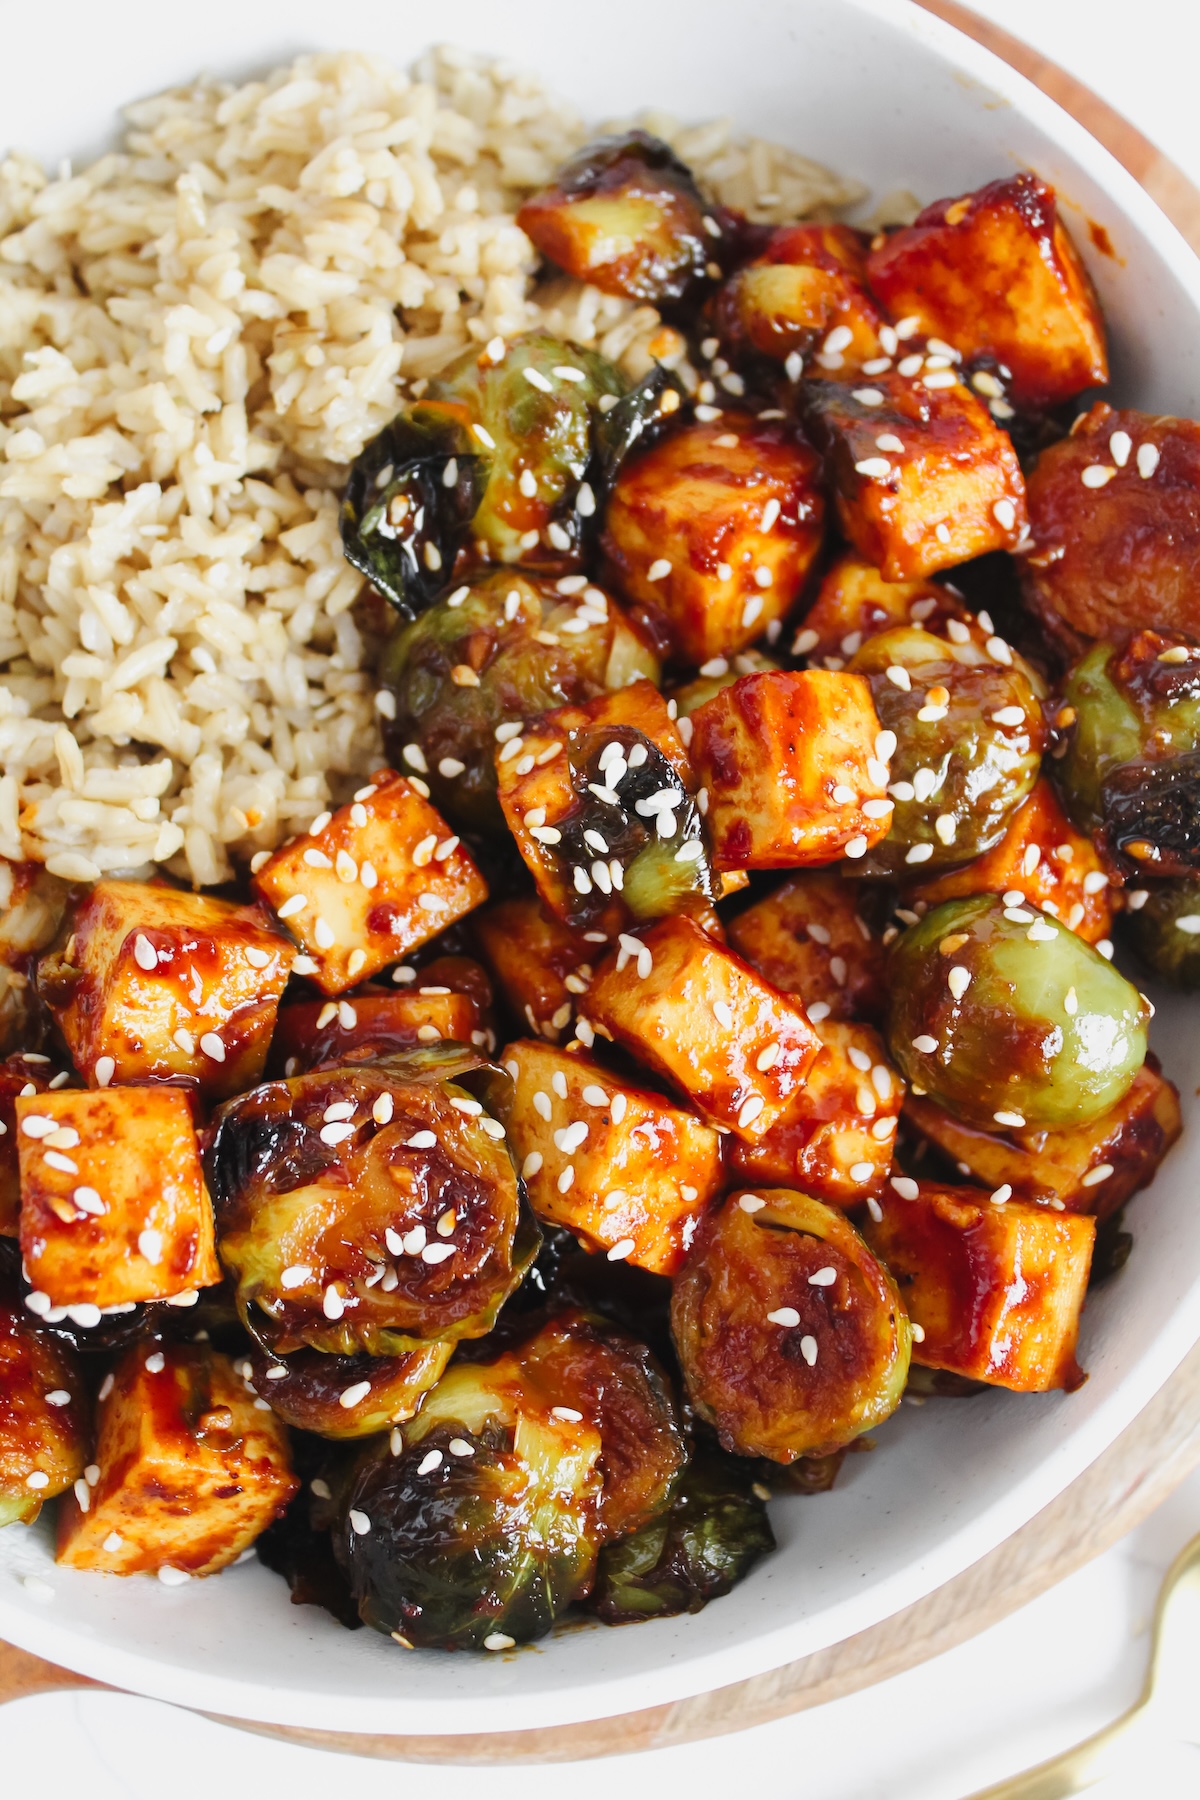 Miso Gochujang Roasted Tofu and Brussels Sprouts (vegan, gluten-free)